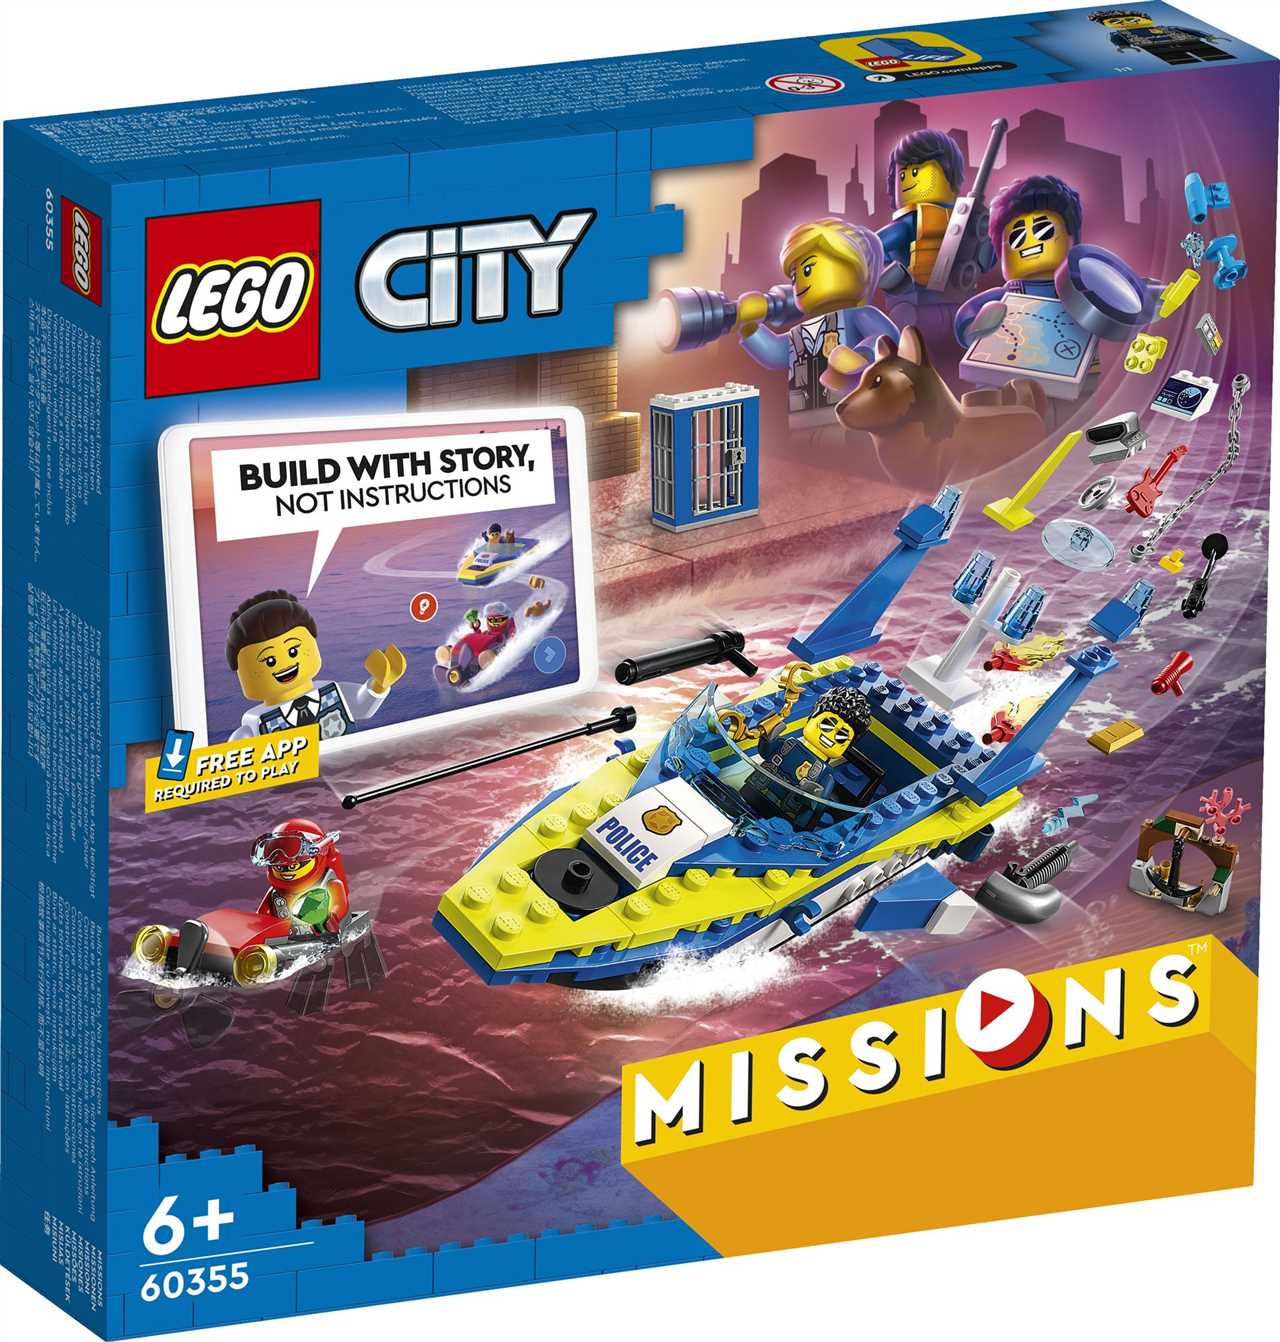 Endless Possibilities with Lego City Sets